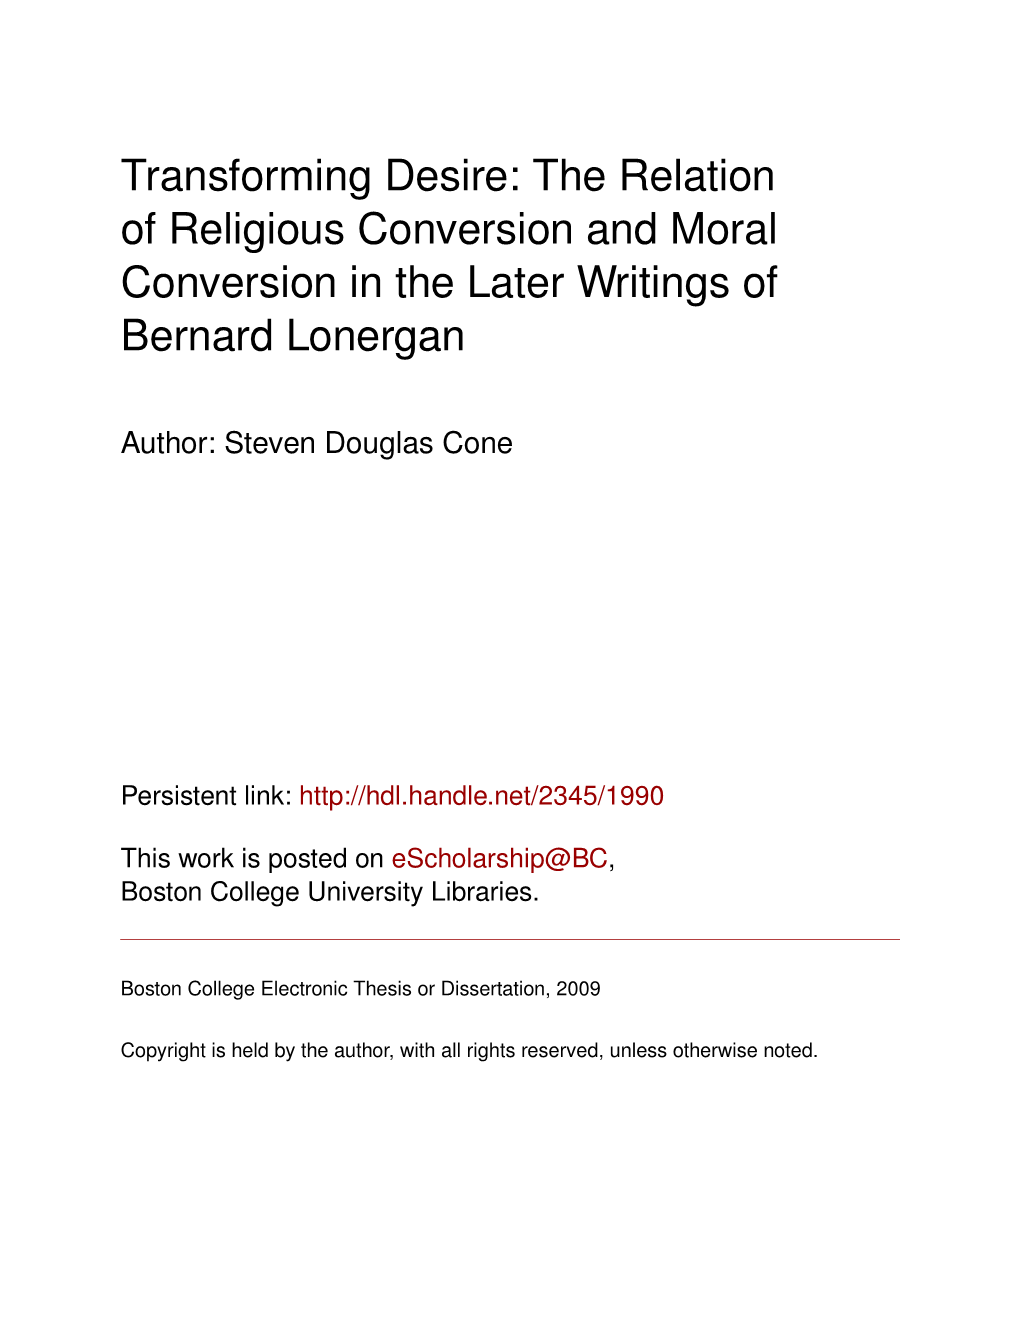 The Relation of Religious Conversion and Moral Conversion in the Later Writings of Bernard Lonergan